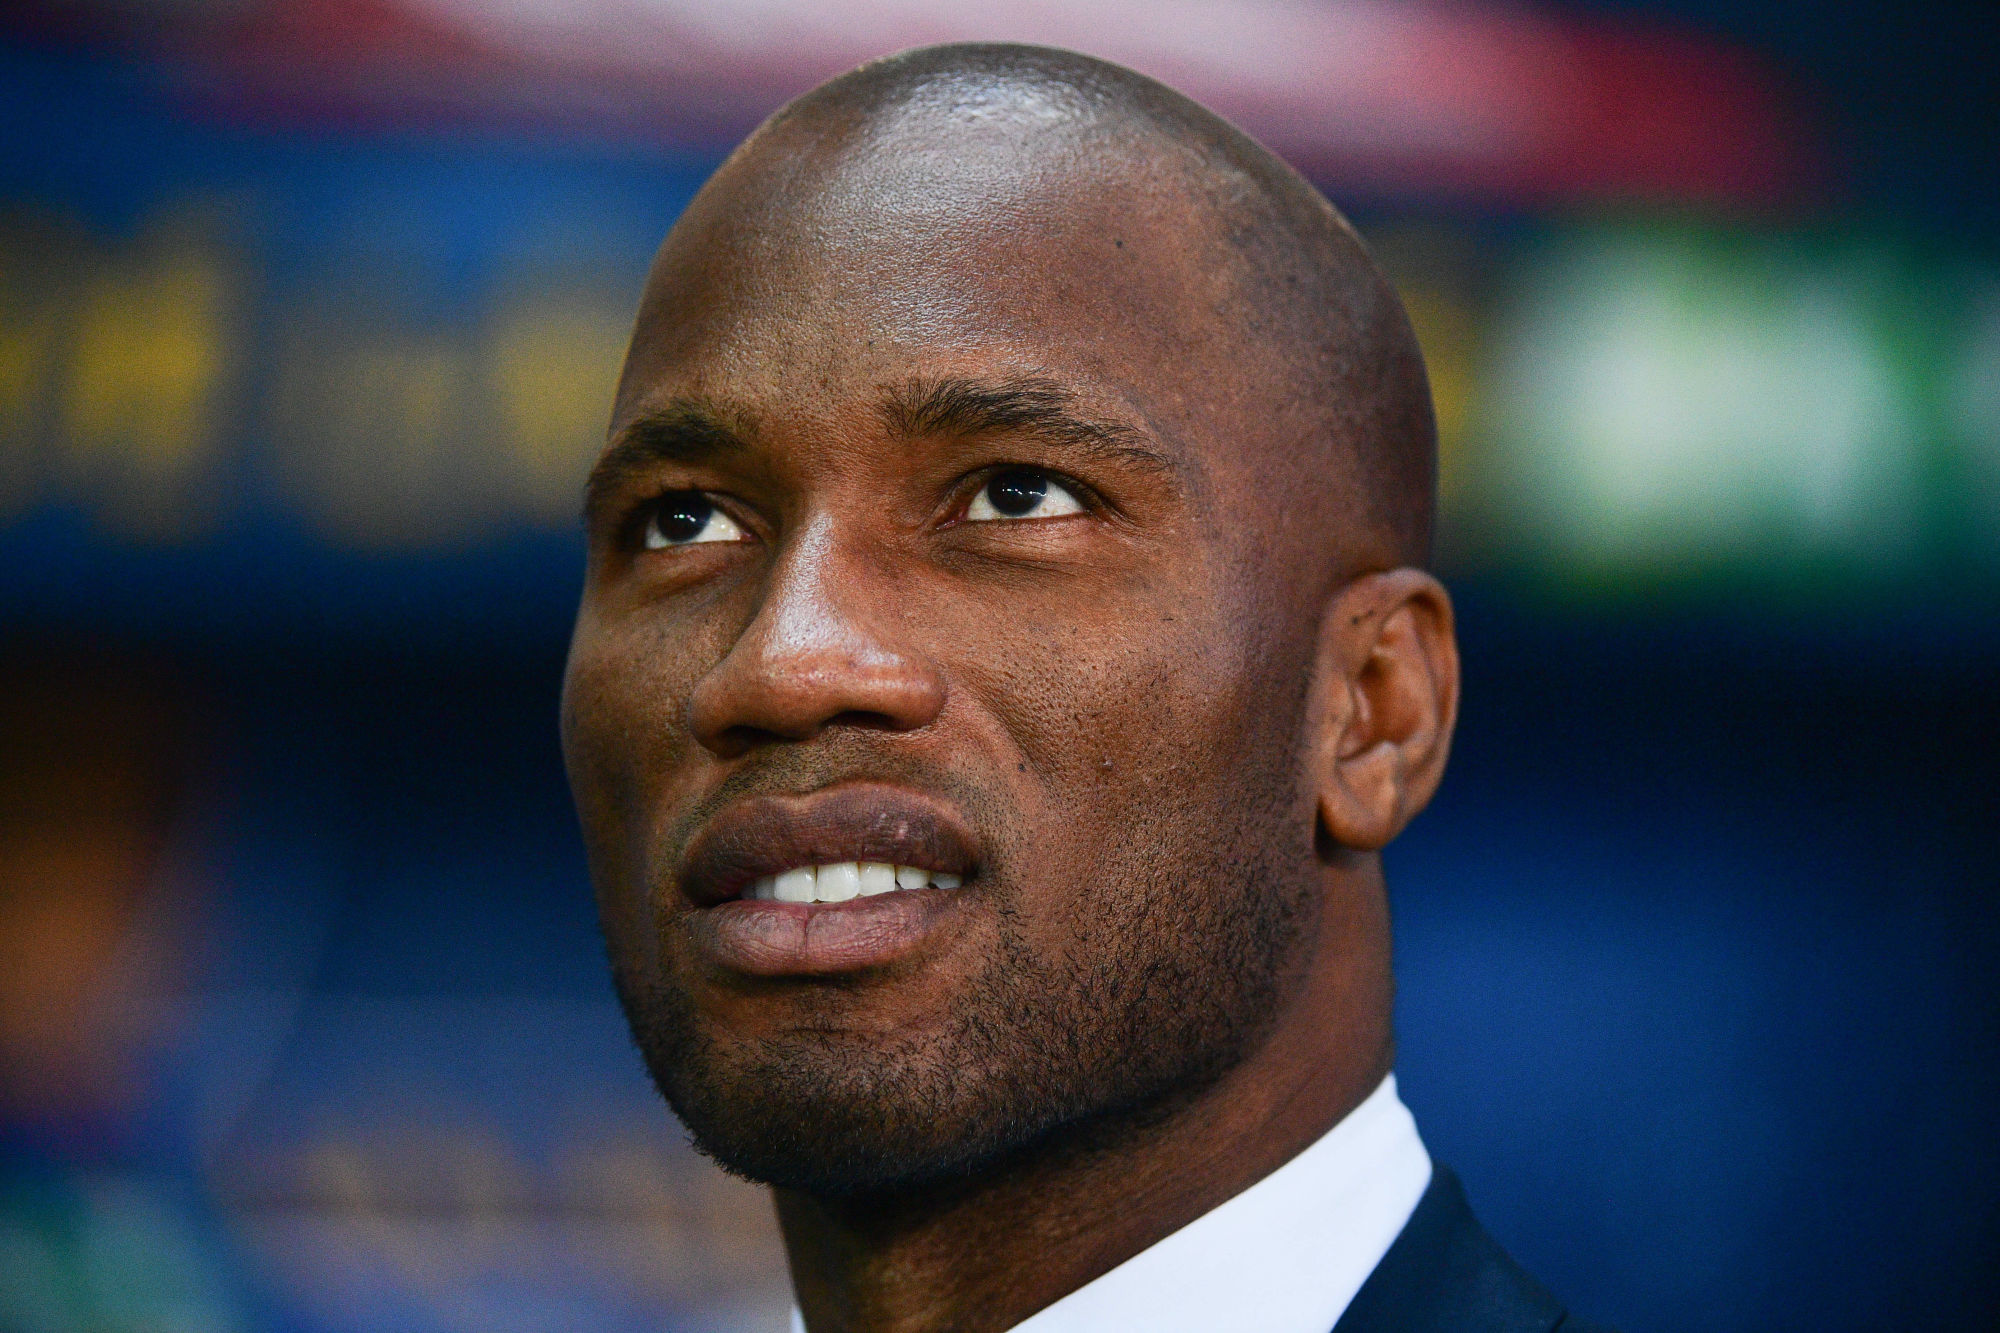 Former Guingamp player Didier Drogba during the French League Cup Final between Guingamp and Strasbourg at Stade Pierre Mauroy on March 30, 2019 in Lille, France. (Photo by Dave Winter/Icon Sport)